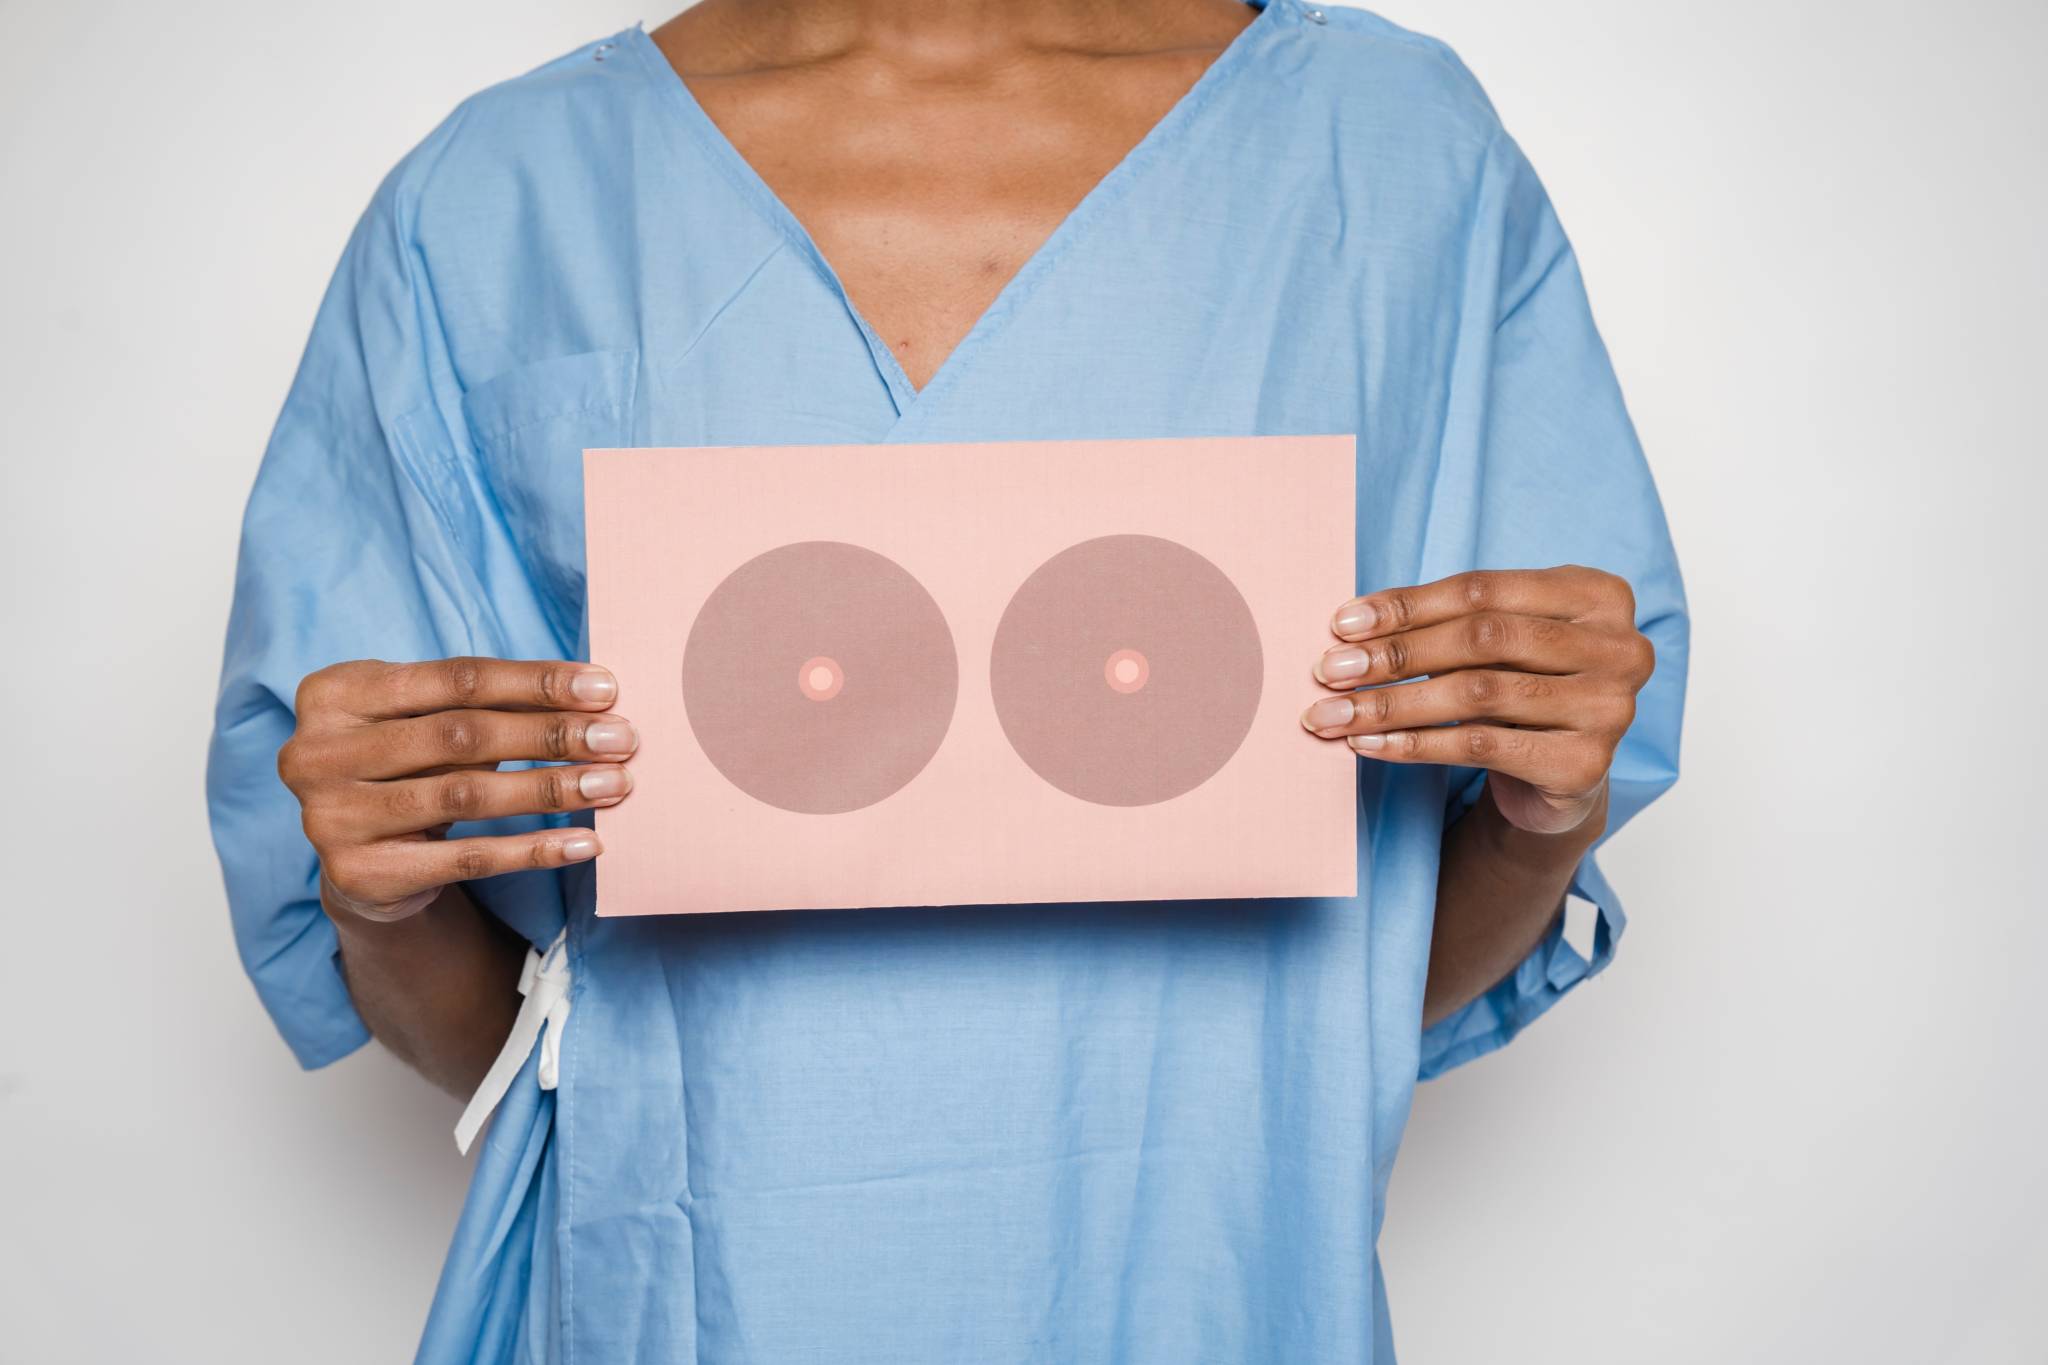 woman wearing light blue medical gown and holding pink card with a drawing of breasts on the front